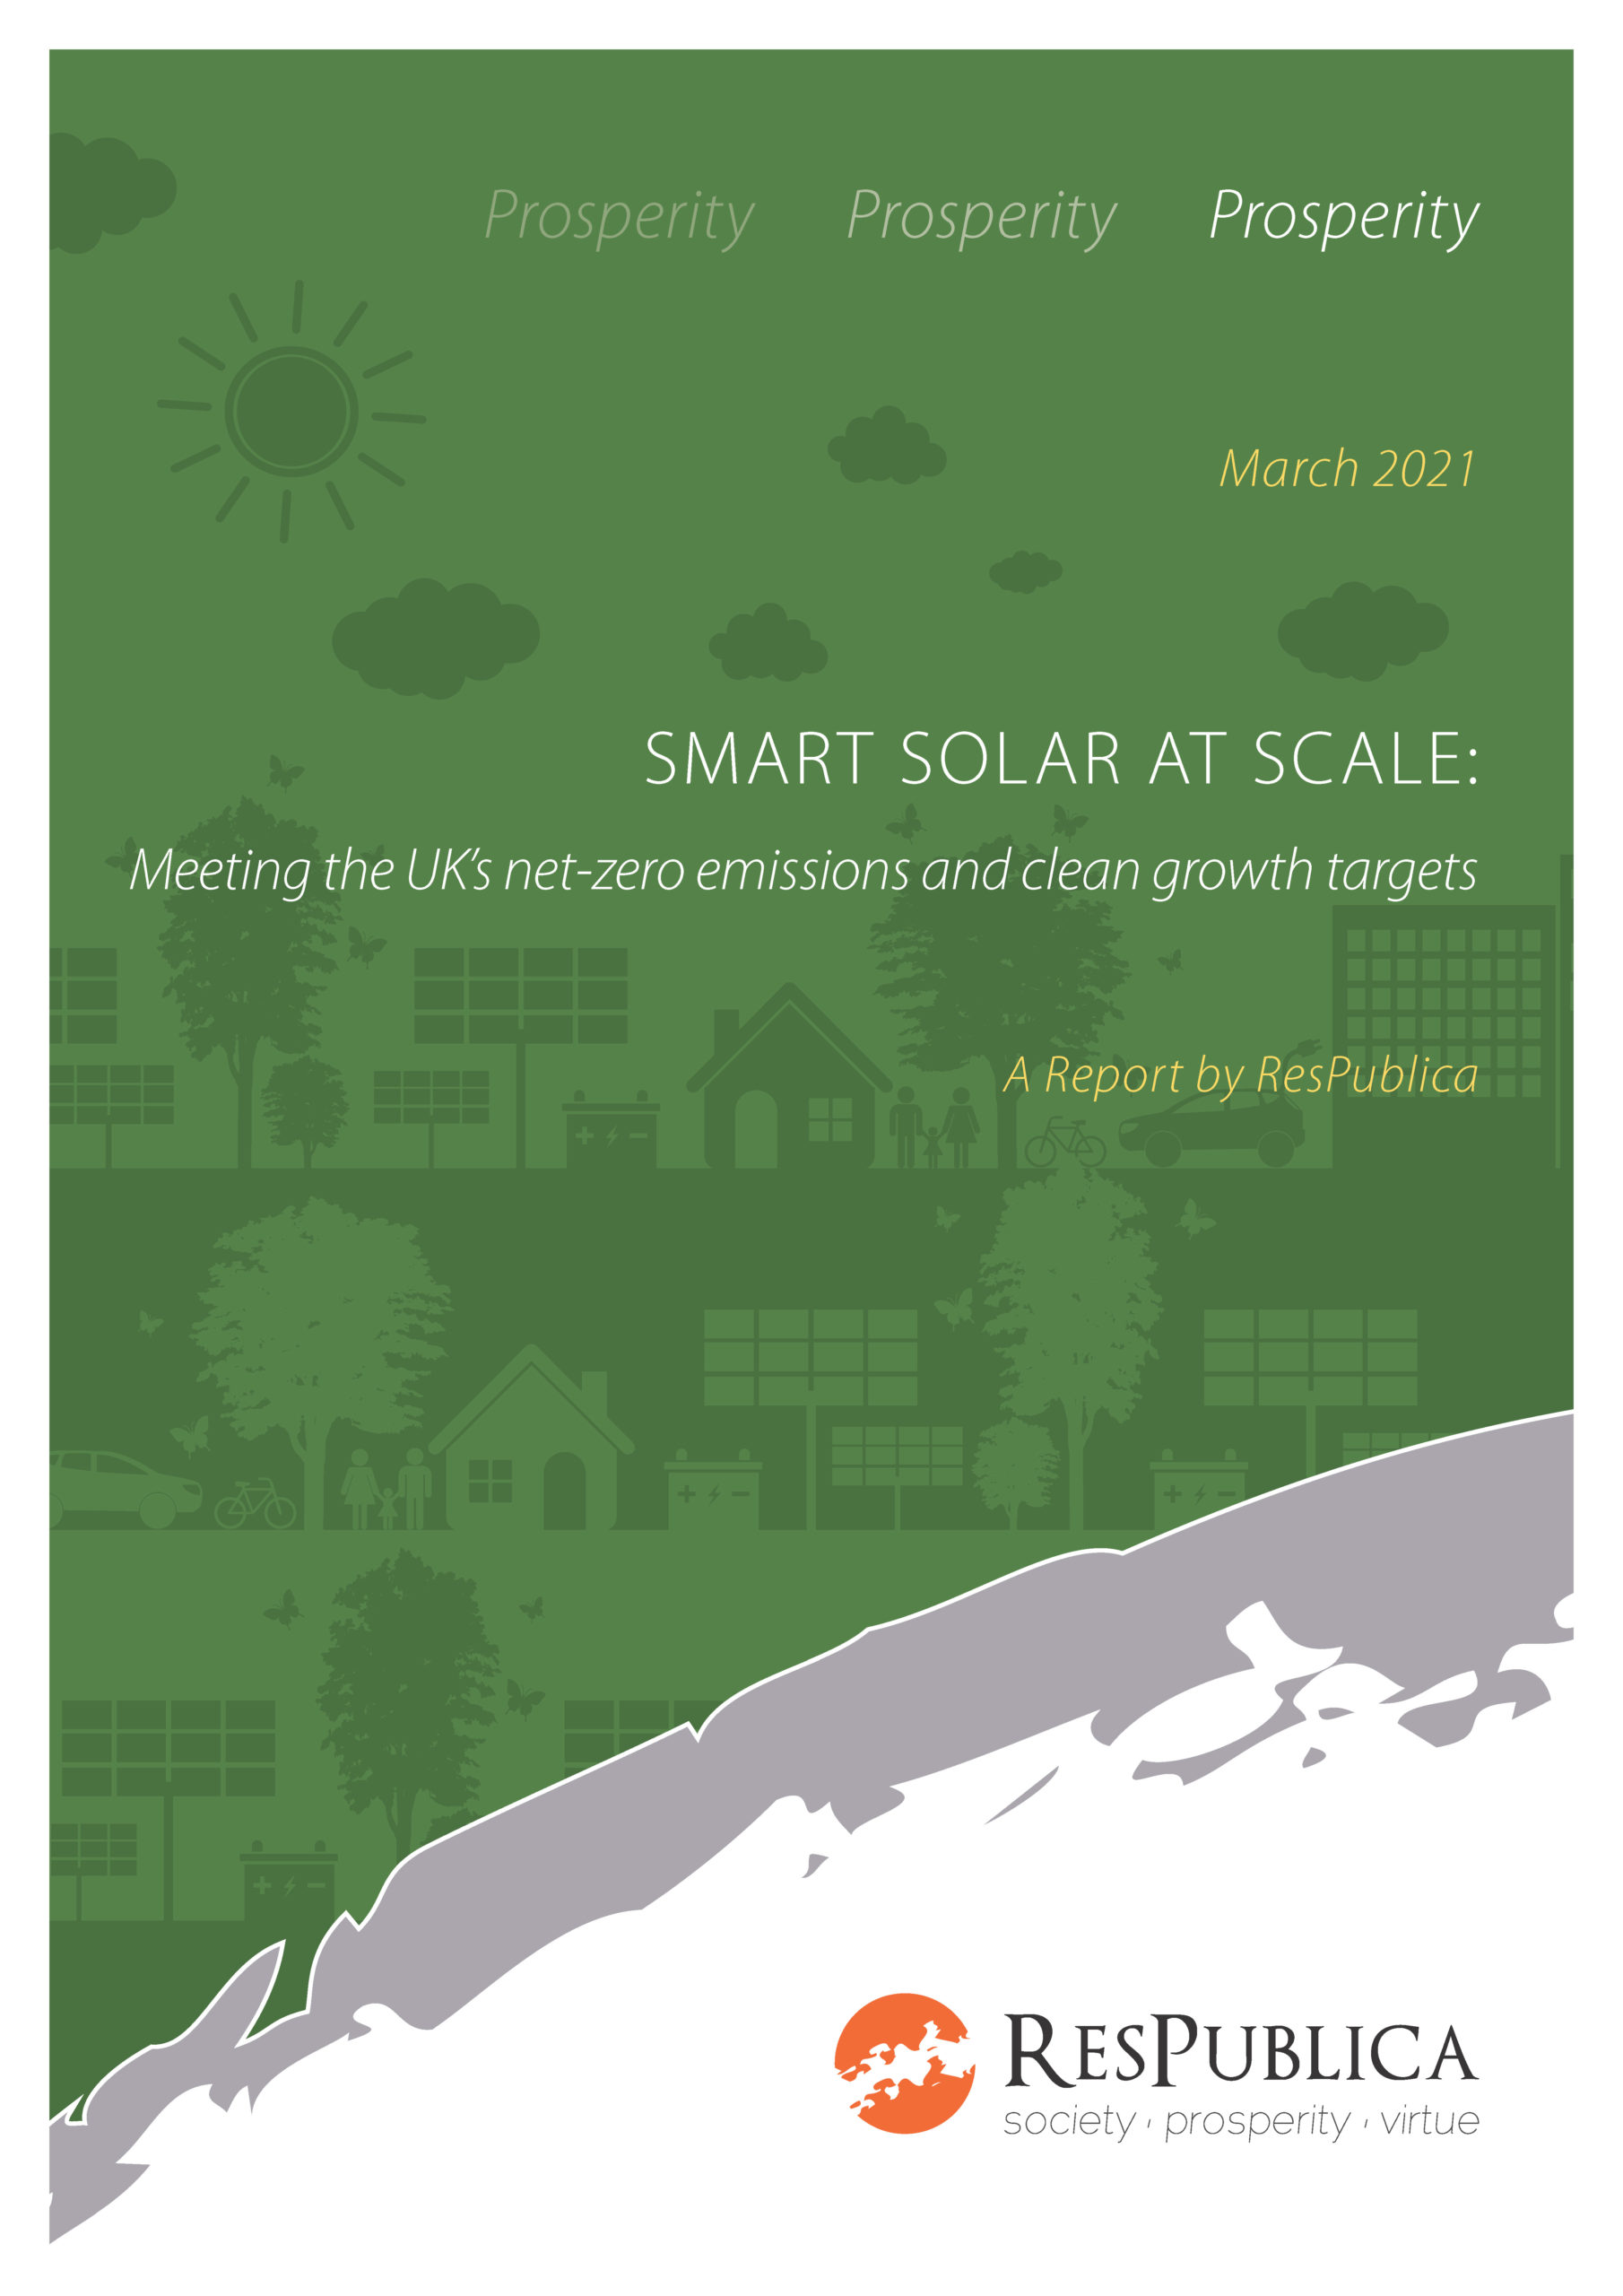 Smart Solar at Scale: Meeting the UK’s net-zero emissions and clean growth targets